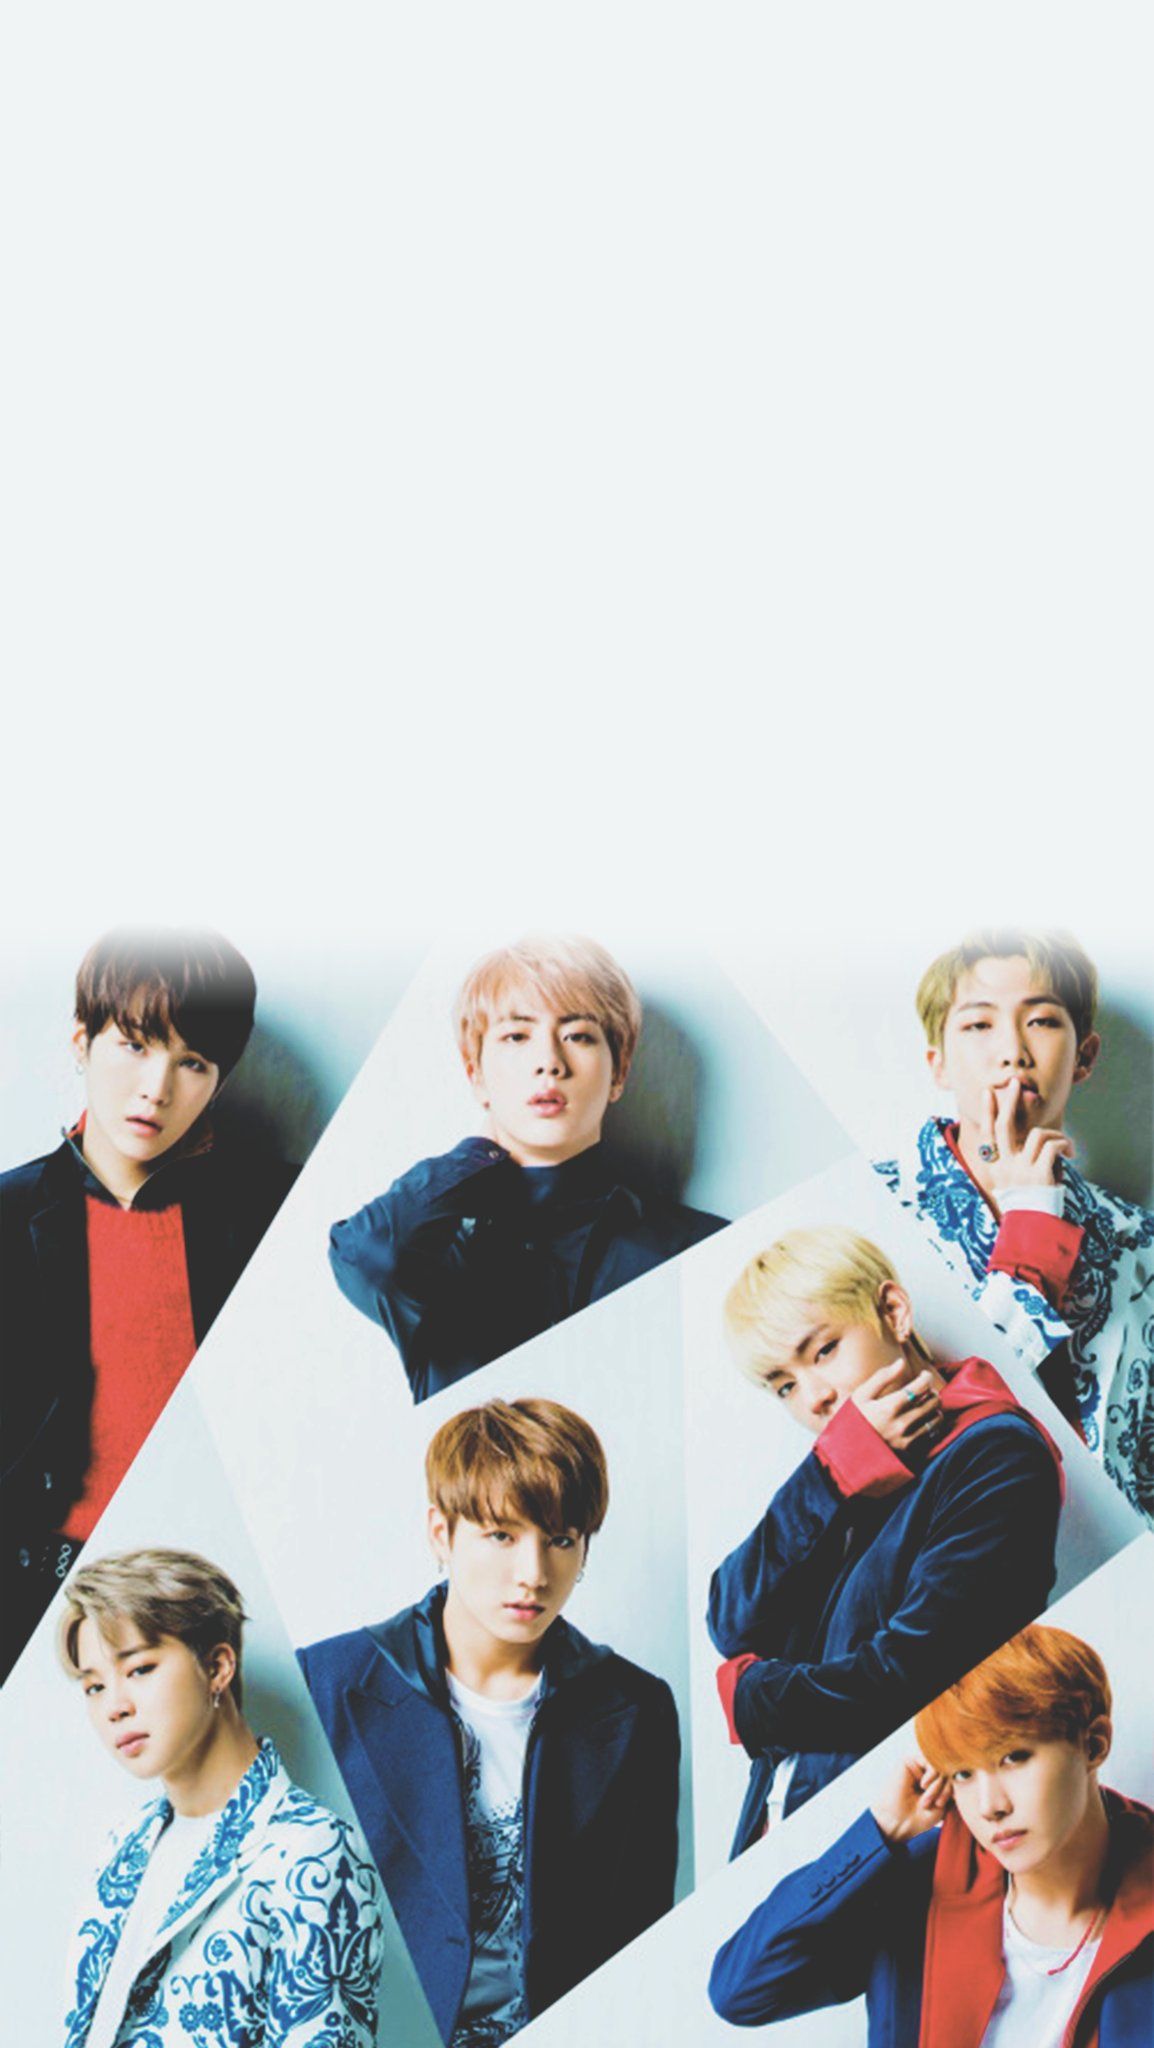 bts wallpaper iphone,people,team,family